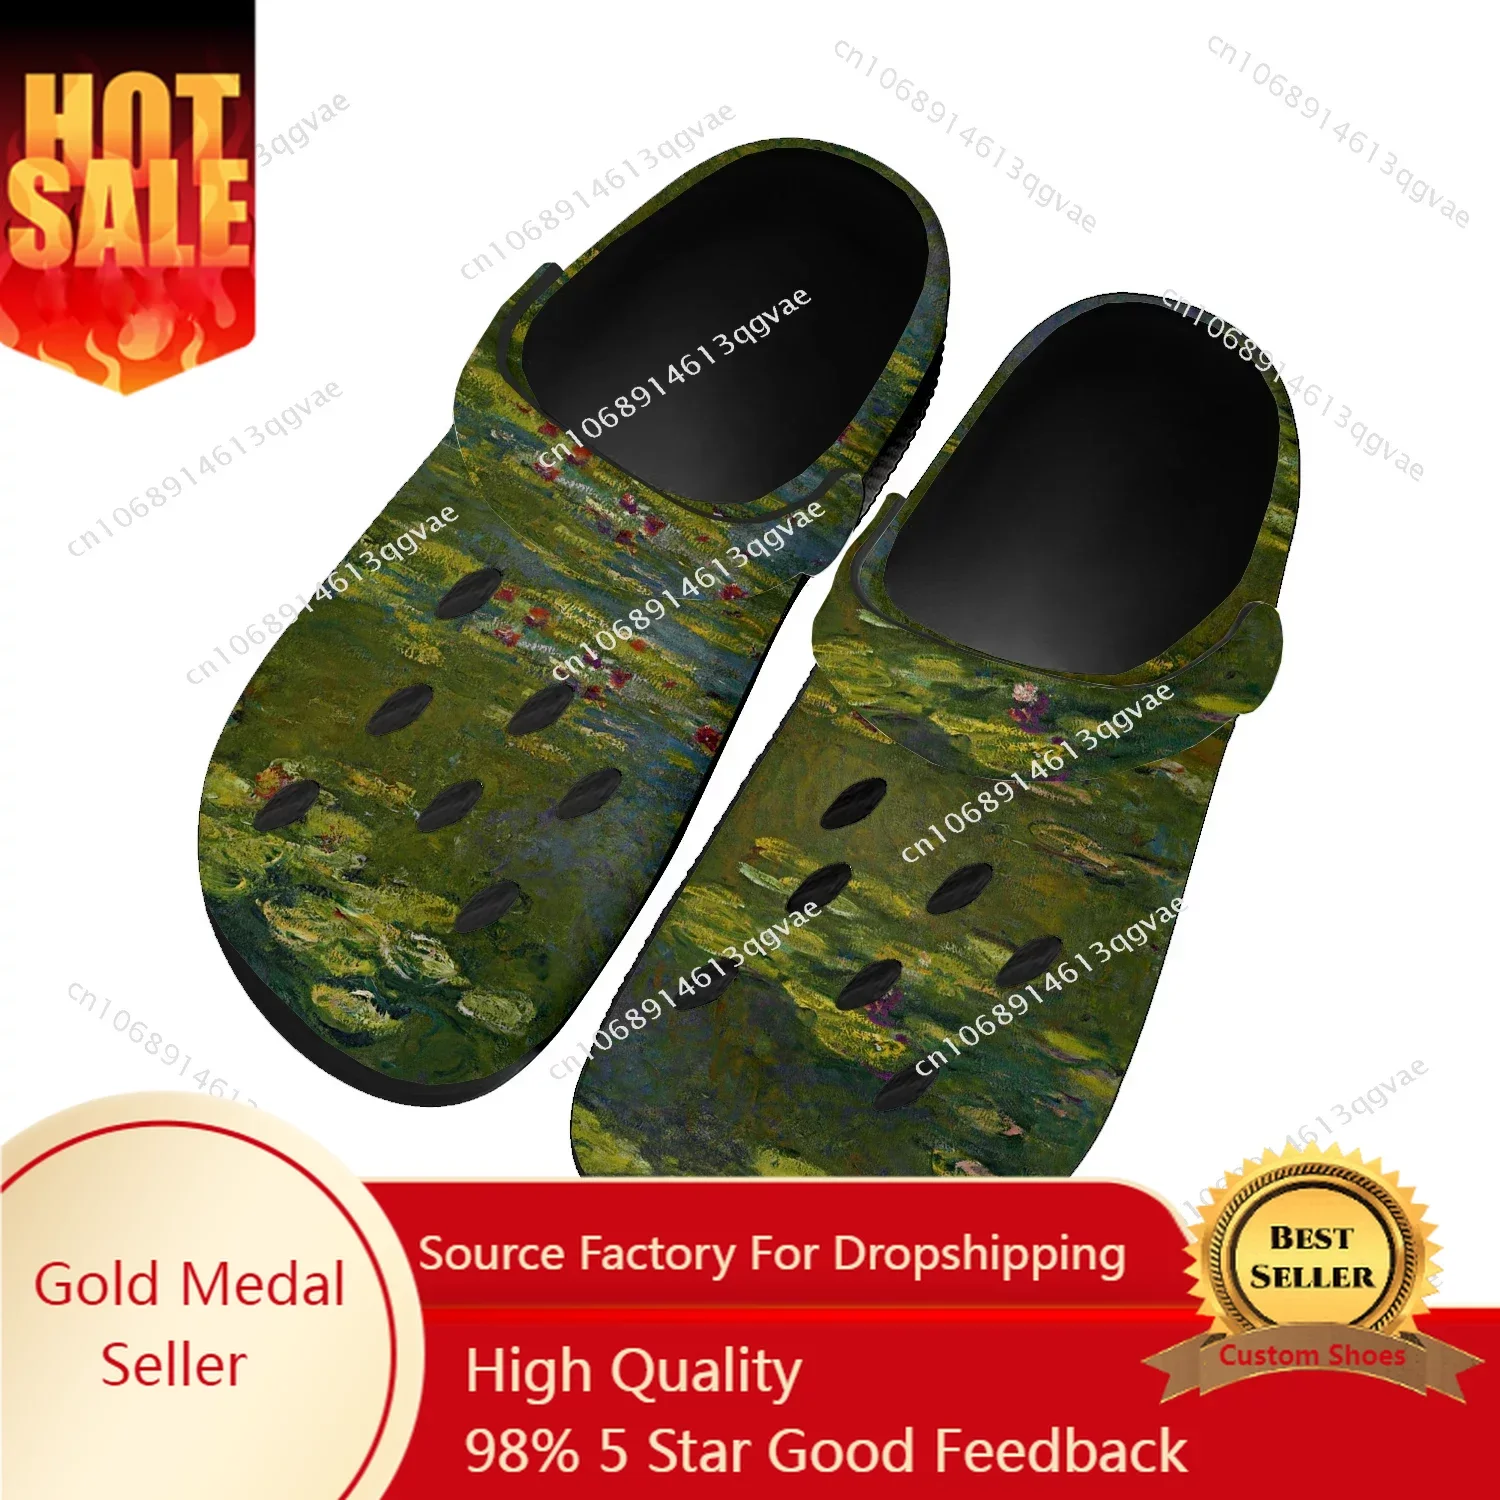 Monet Water Lilies Home Clog Mens Women Youth Boy Girl Sandals Shoes Garden Custom Made Breathable Shoe Beach Hole Slippers